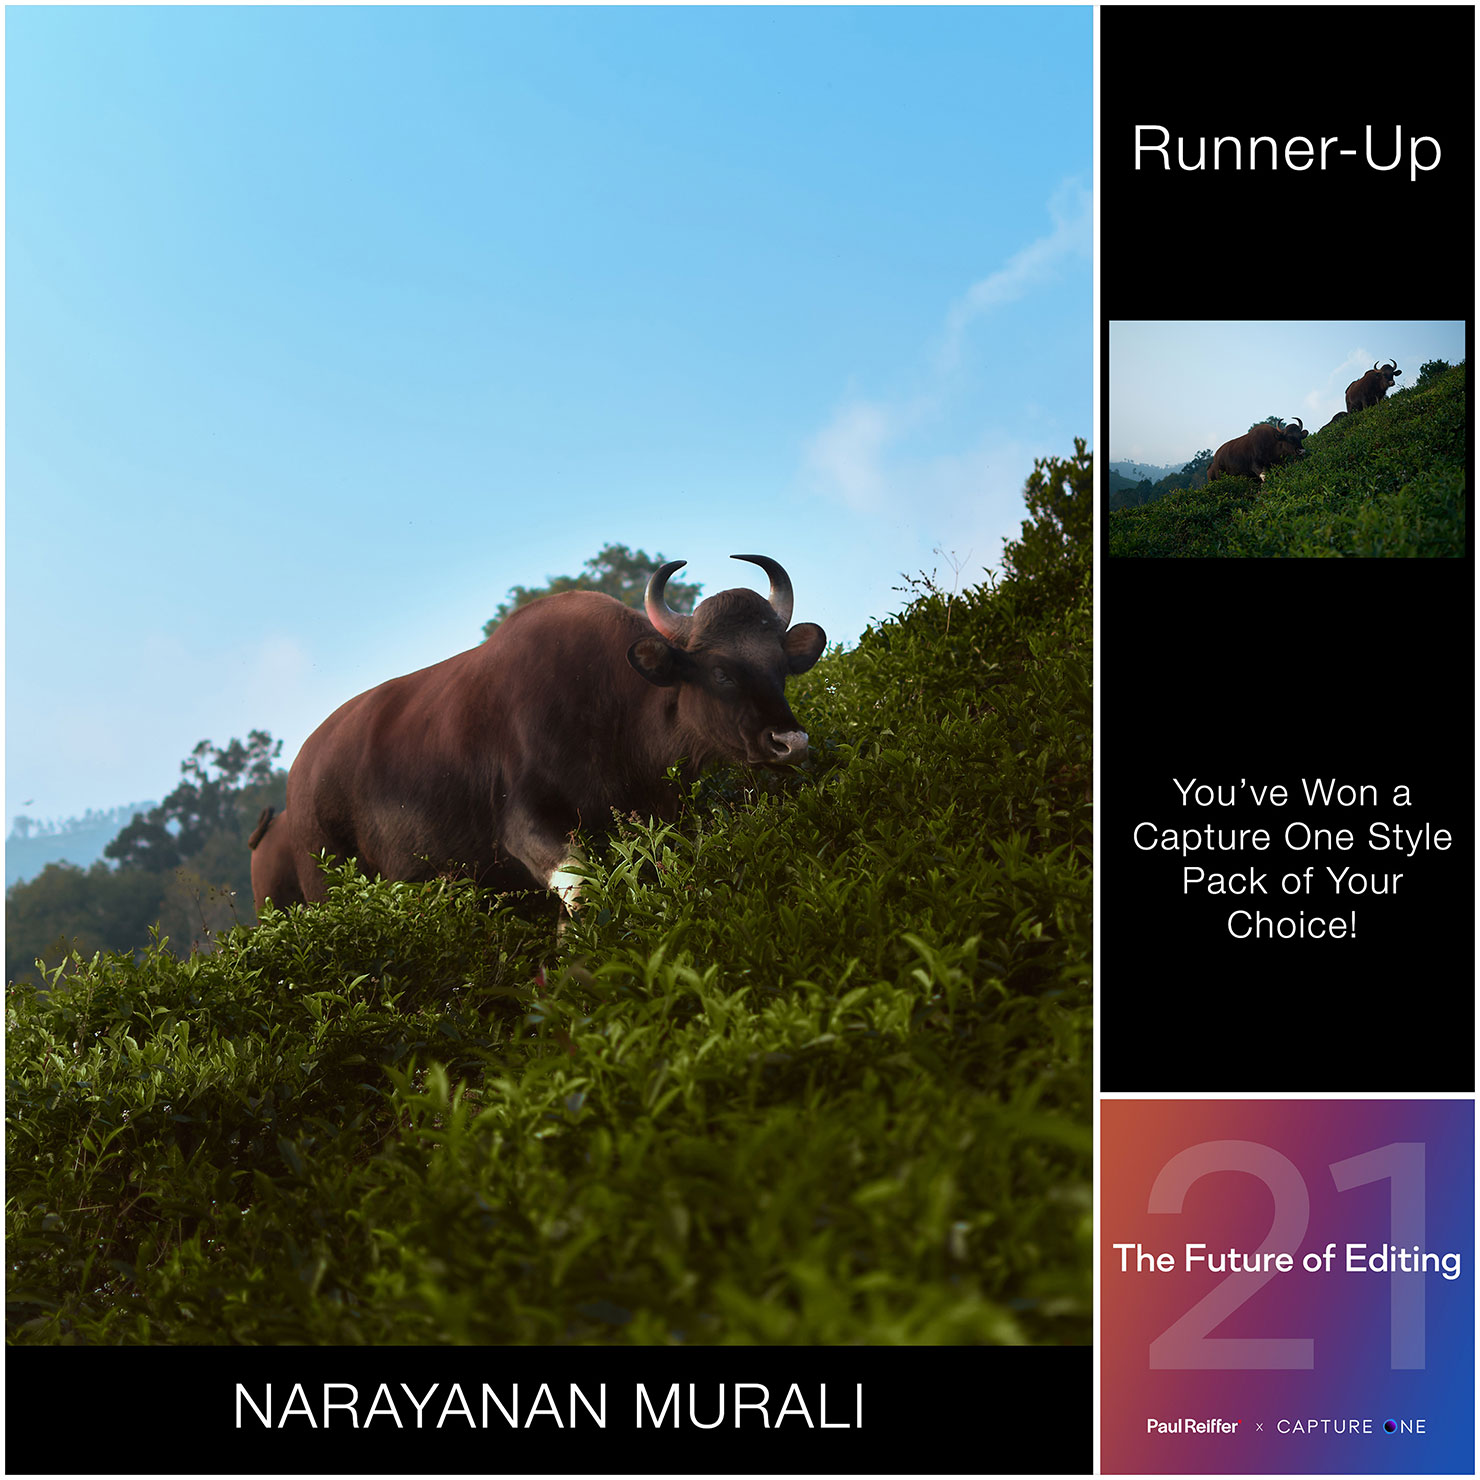 Capture One 21 Competition Runner Up Image Narayanan Murali